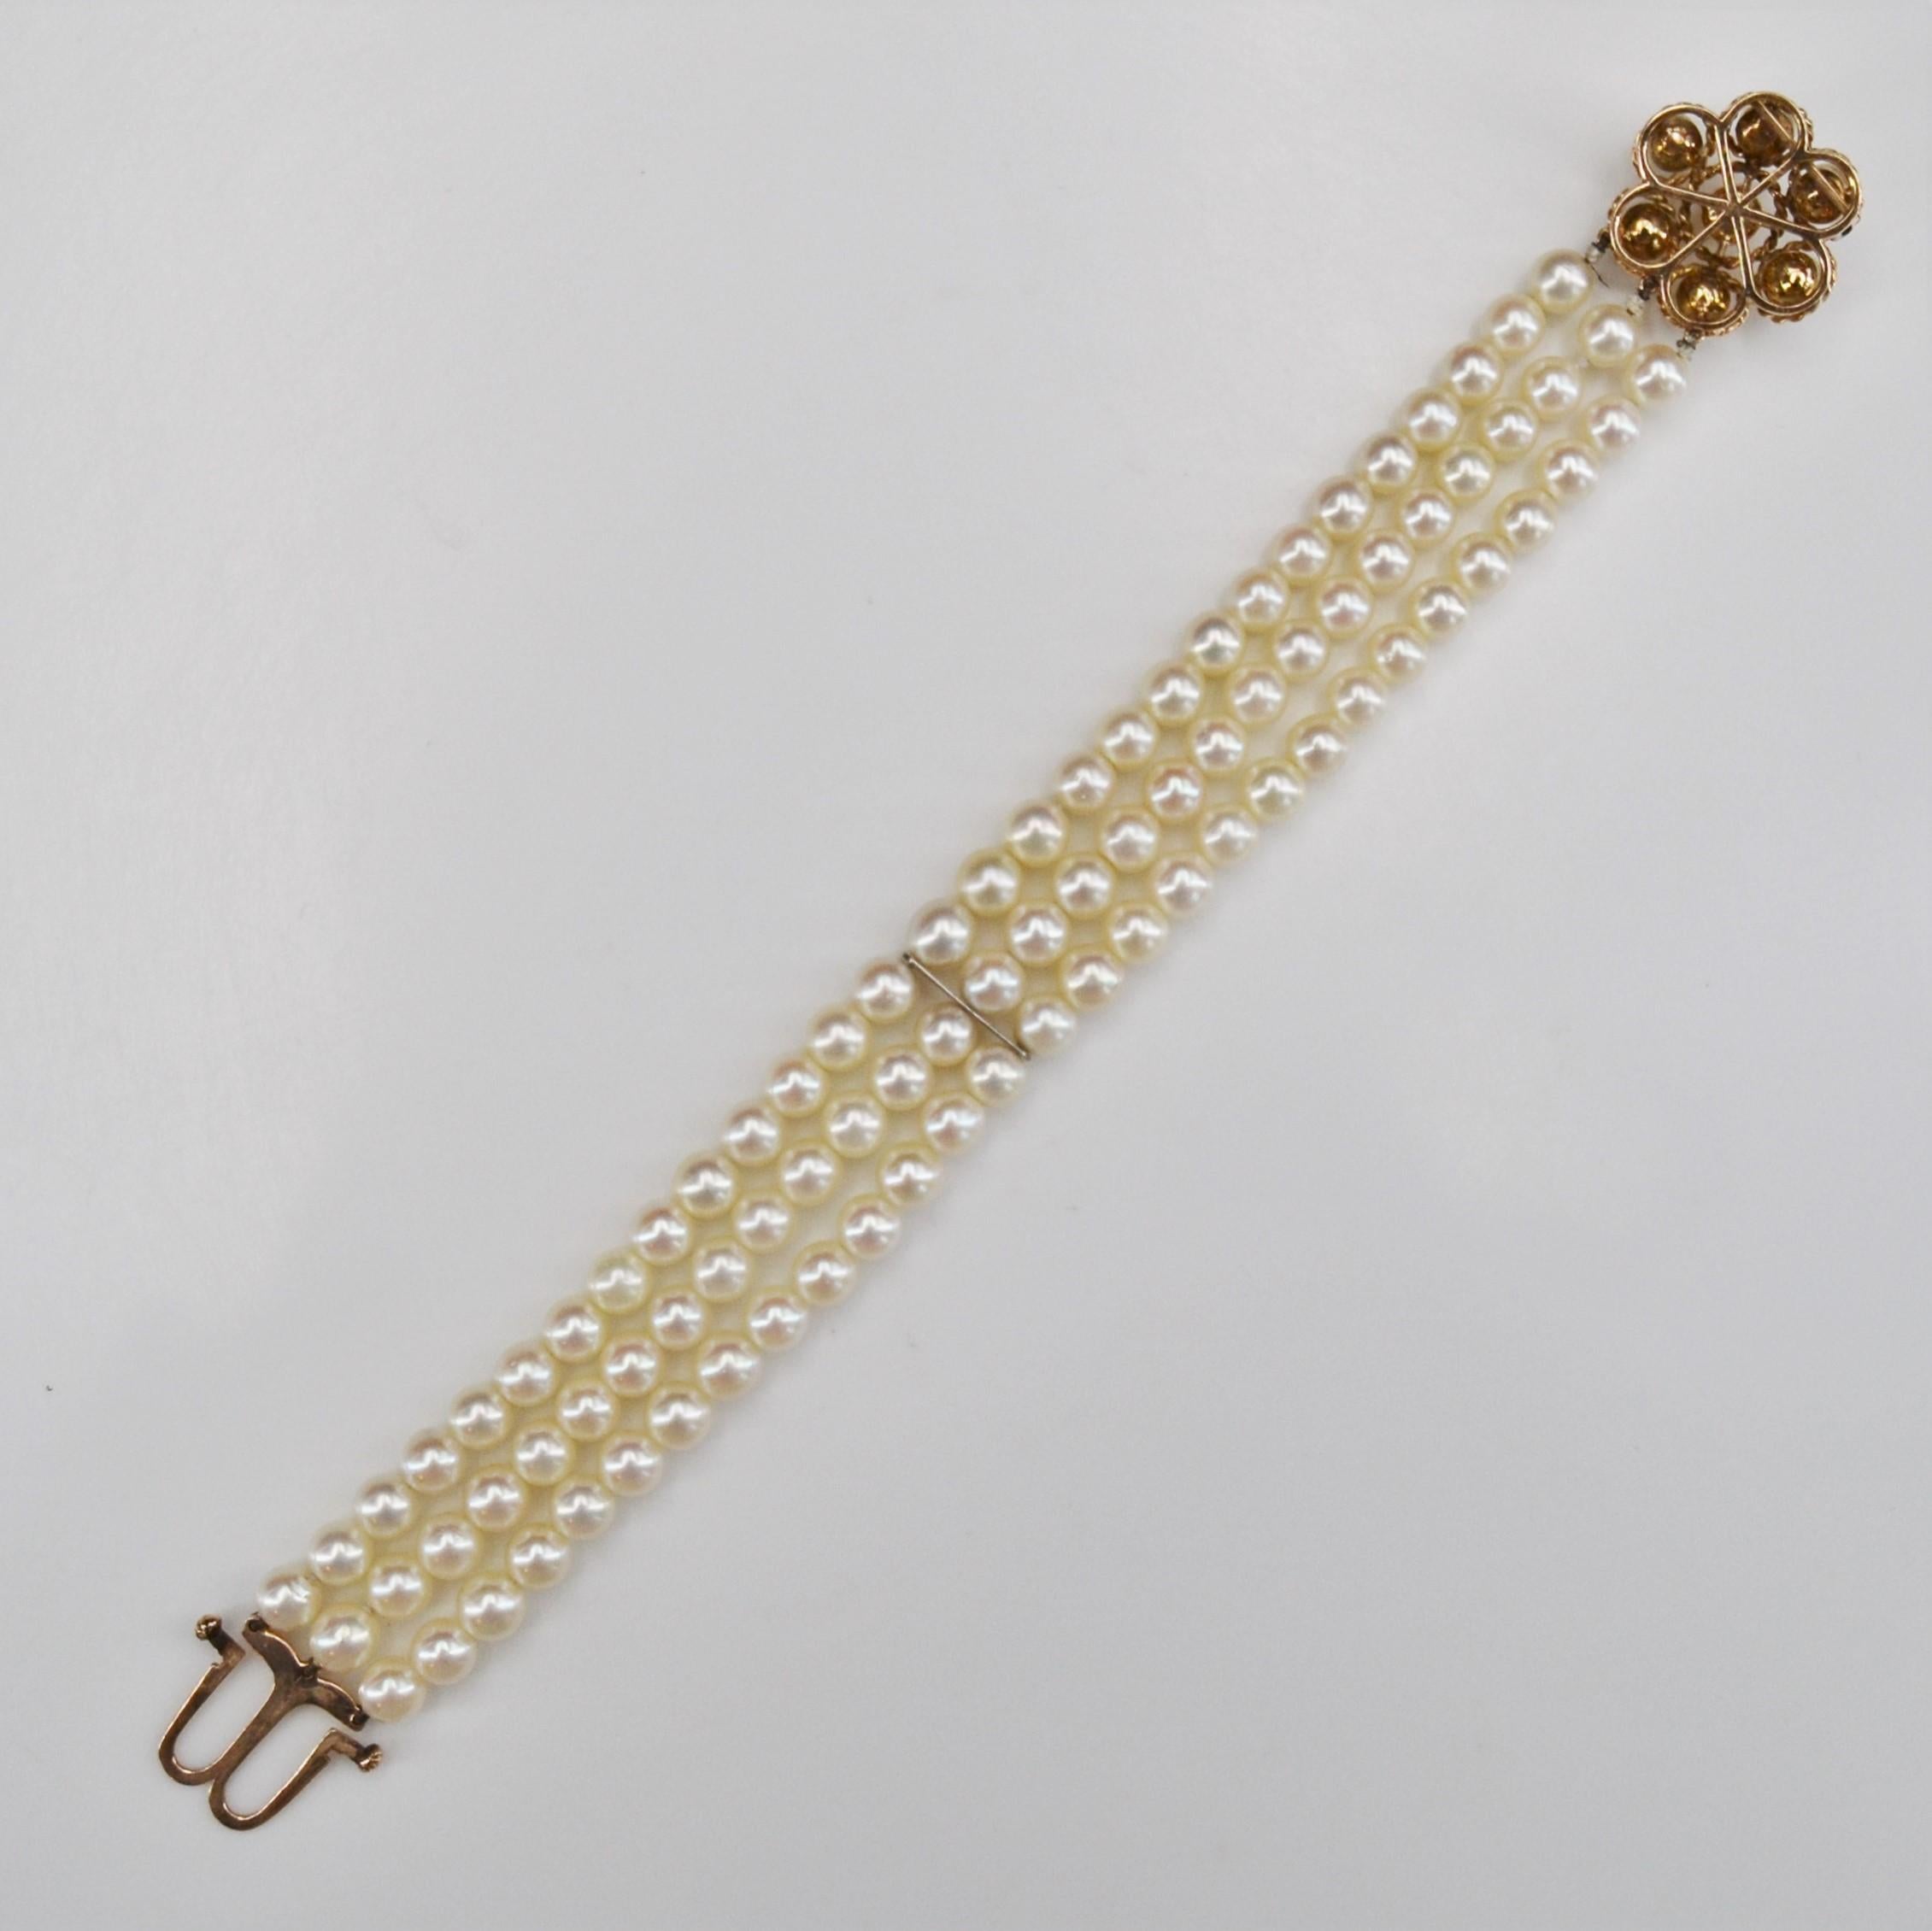 Retro 1960s Cultured Pearl 18 Karat Yellow Gold Flower Clasp 3 Rows Bracelet For Sale